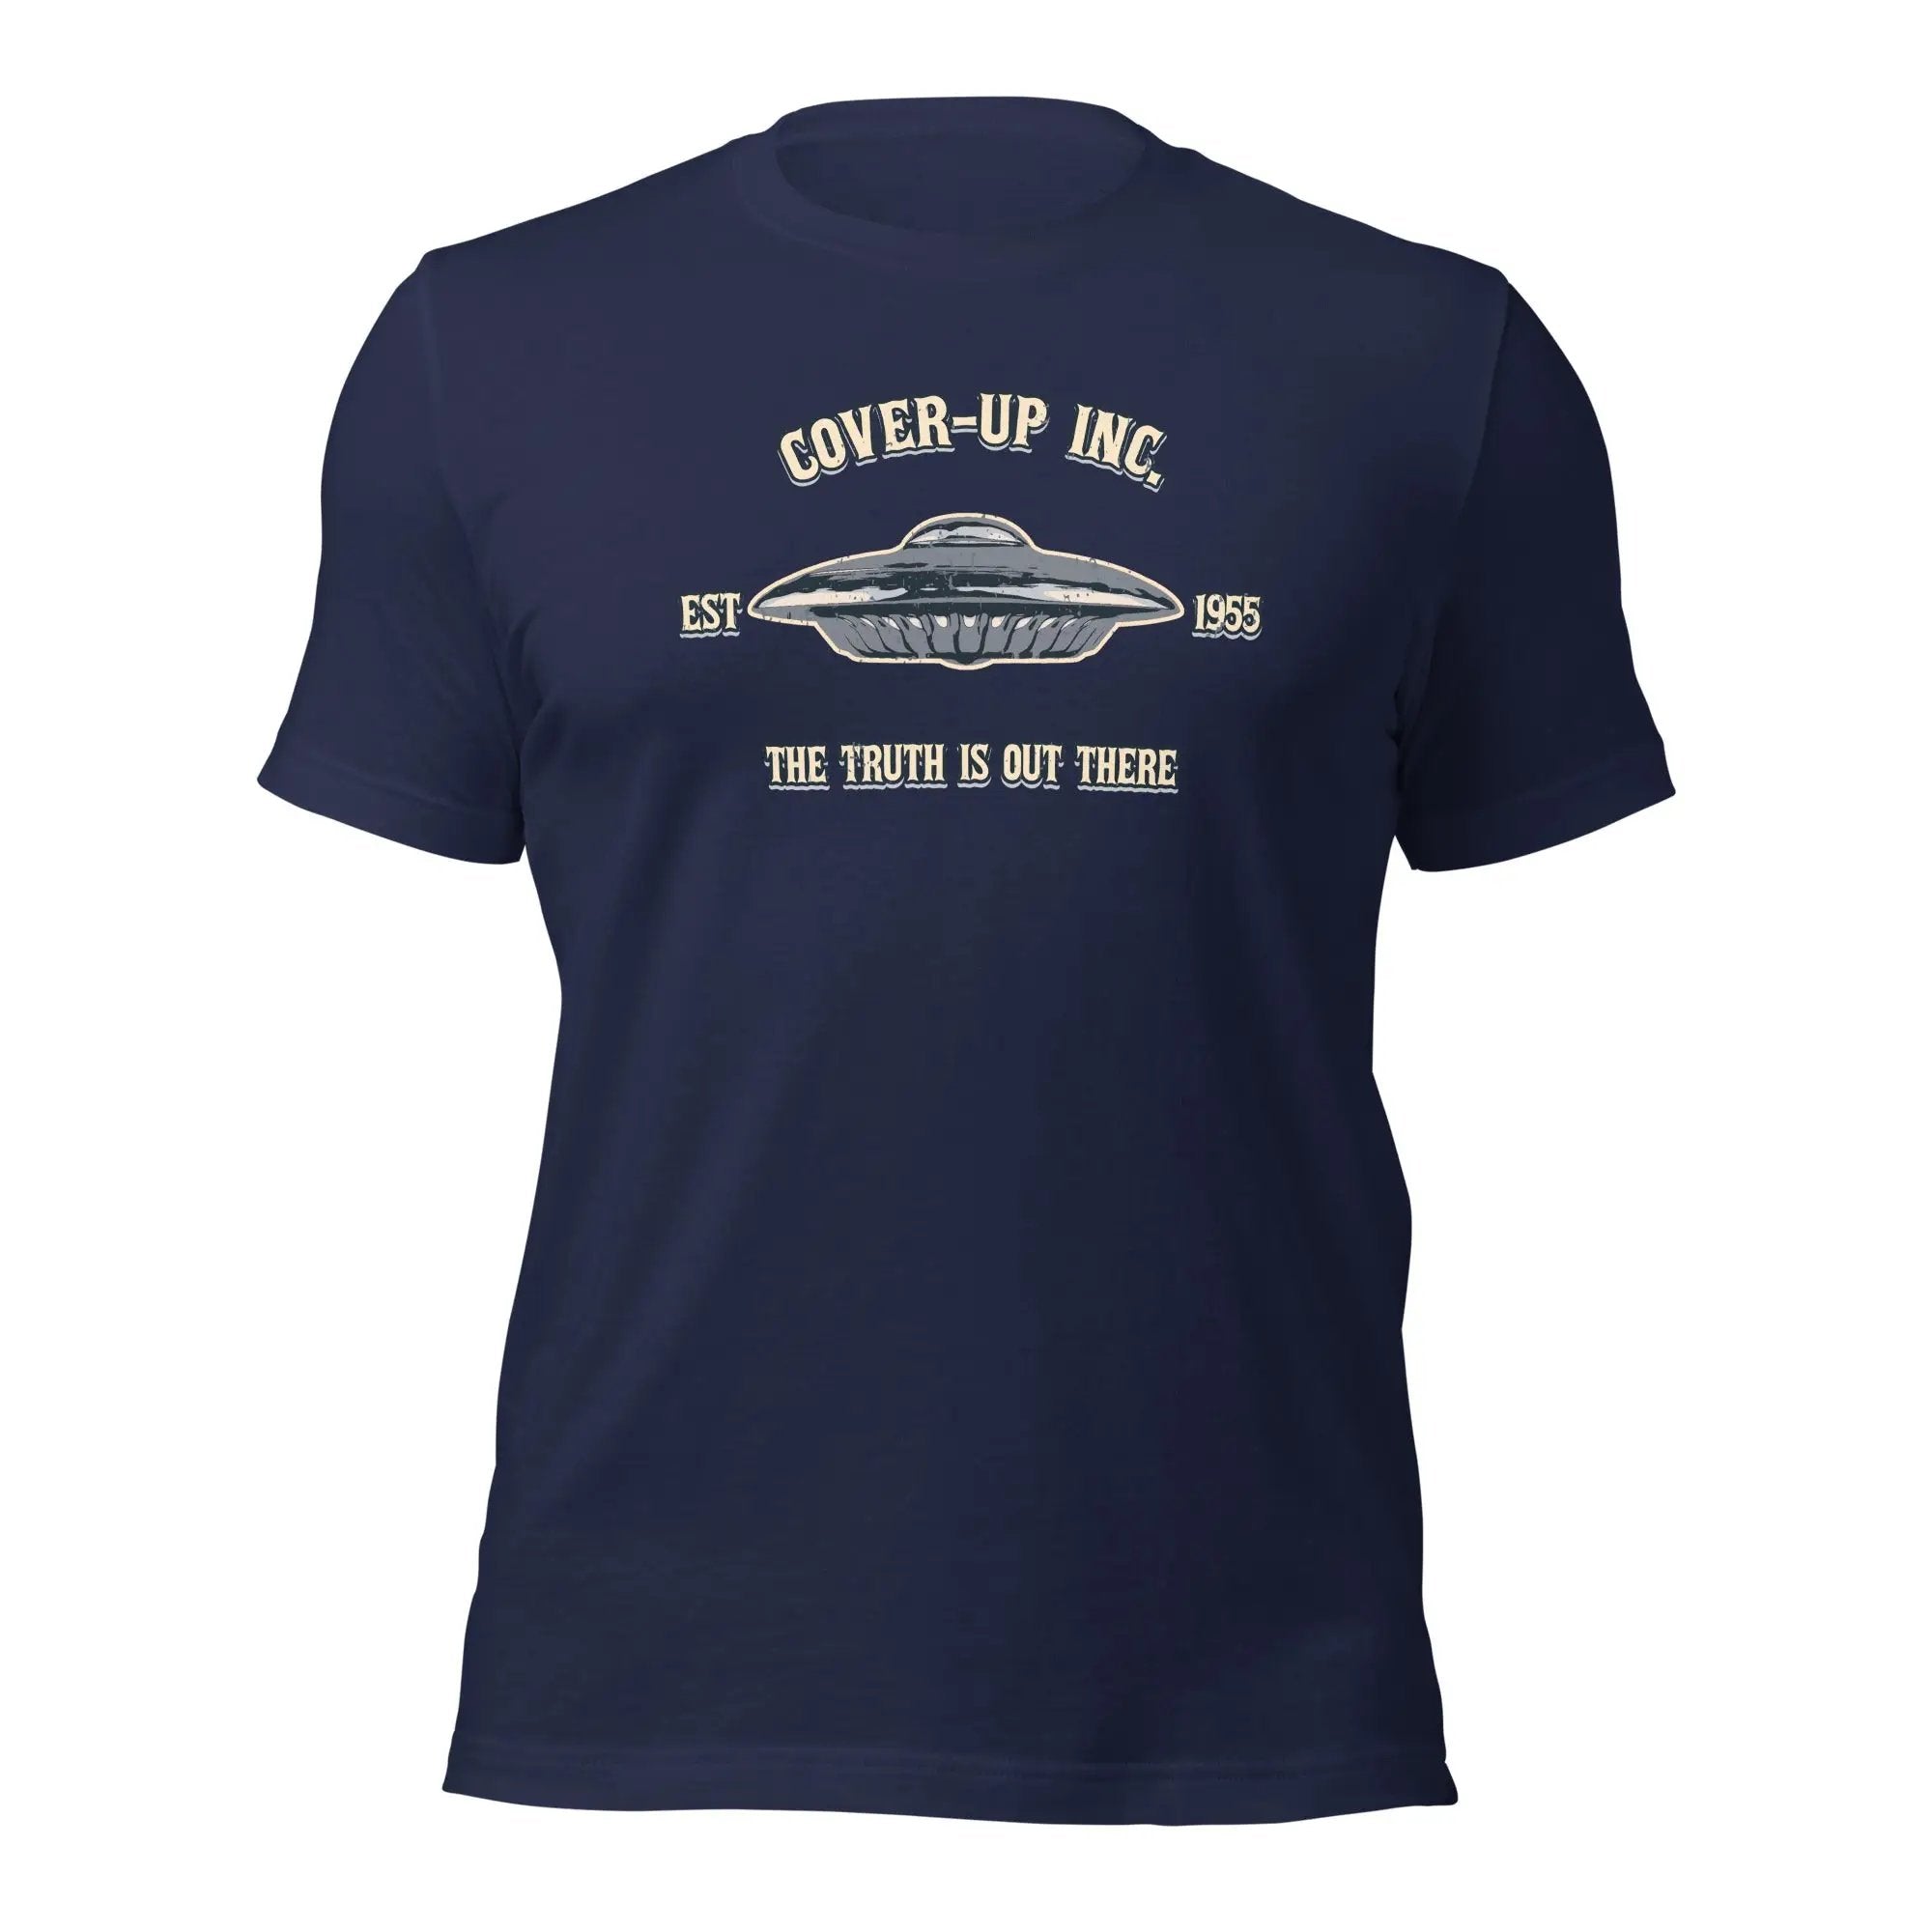 a navy blue t - shirt with the words cover up inc on it